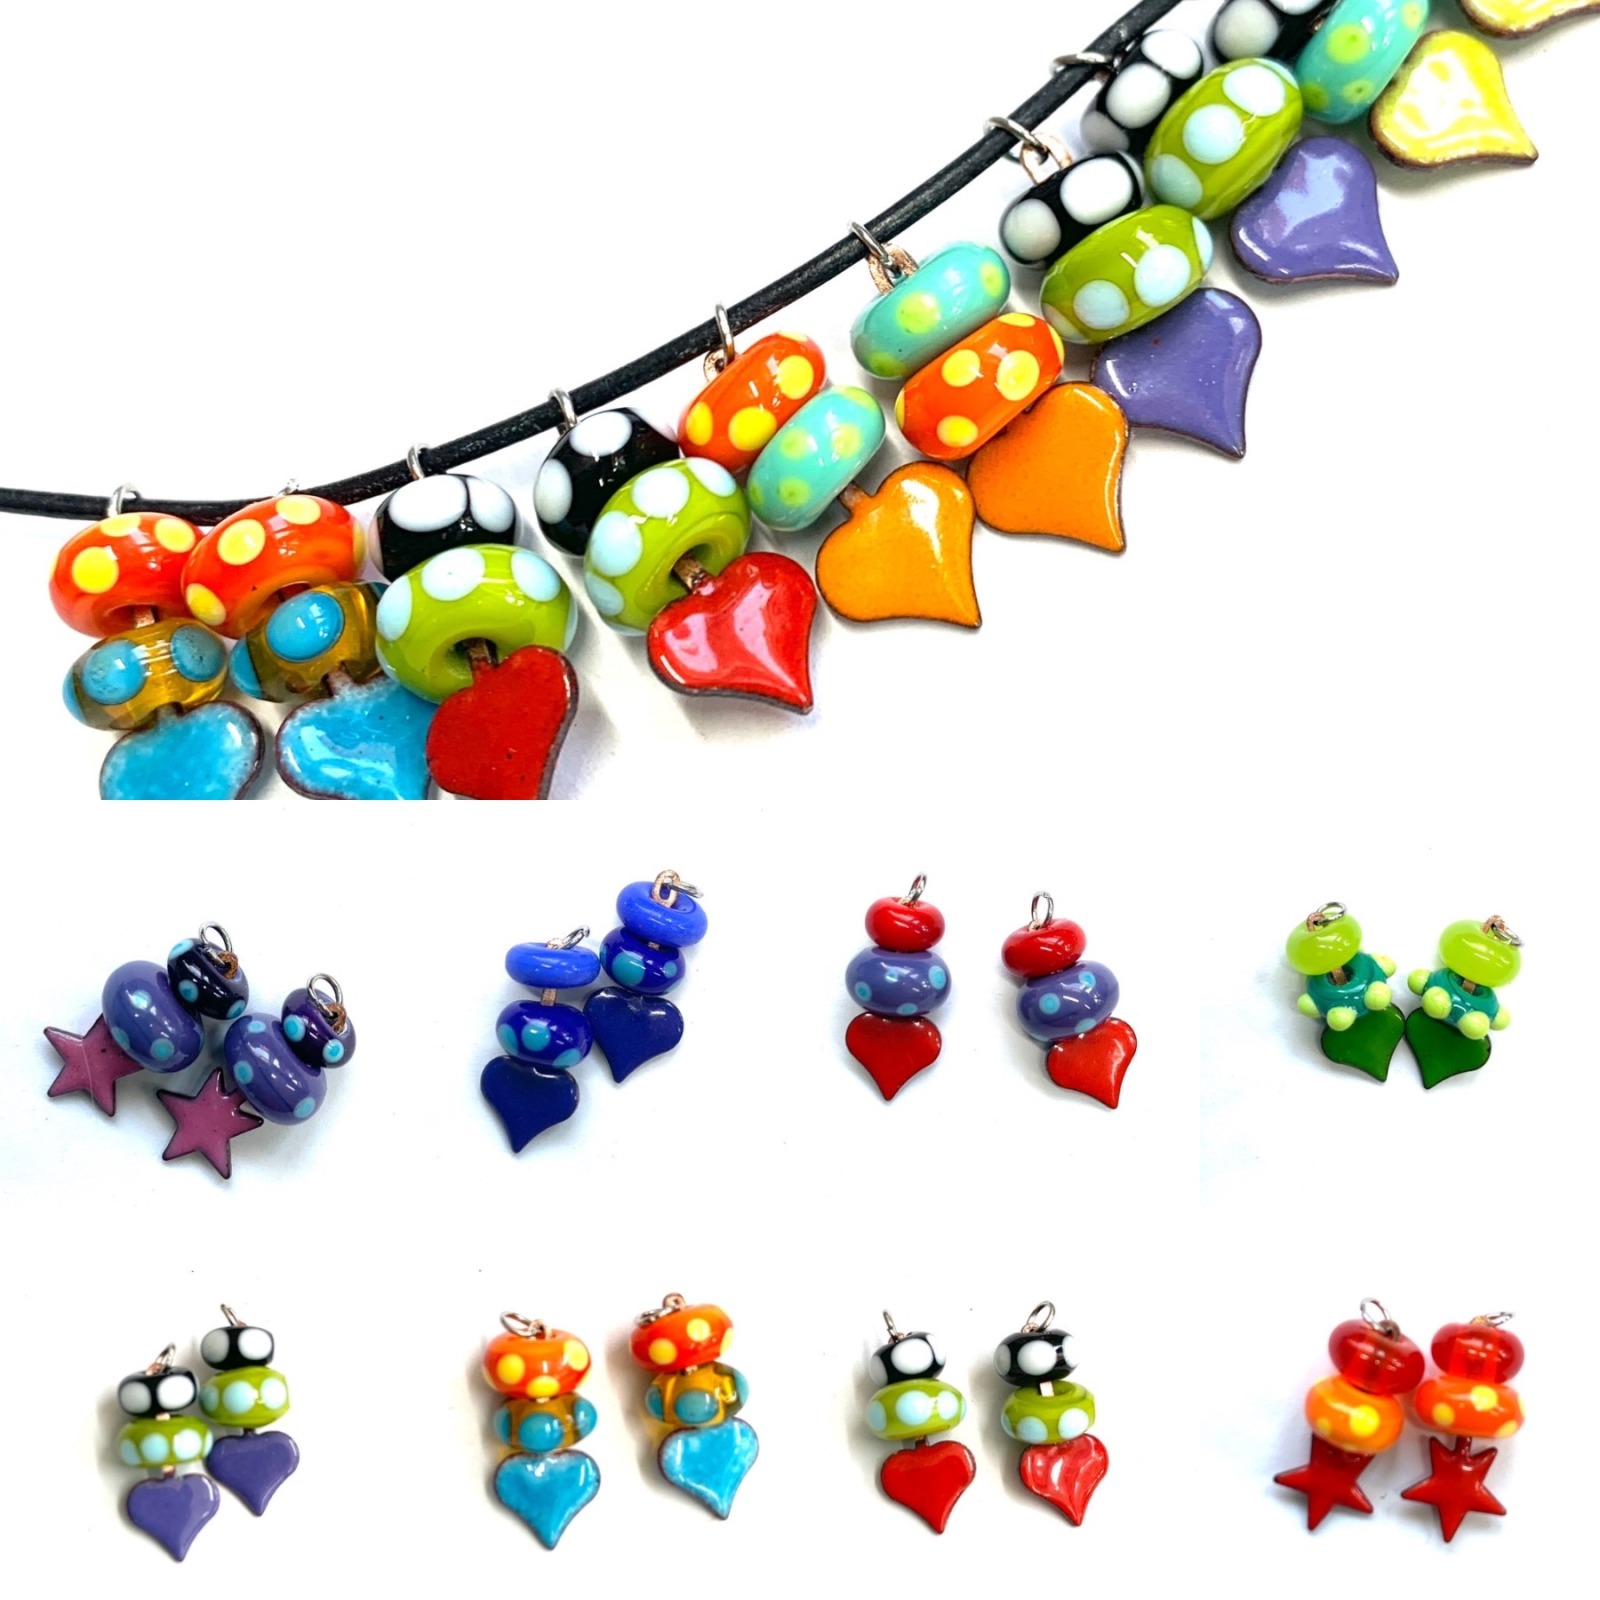 Sweet little charms for earrings. Handmade glass beads with tiny enameled charms